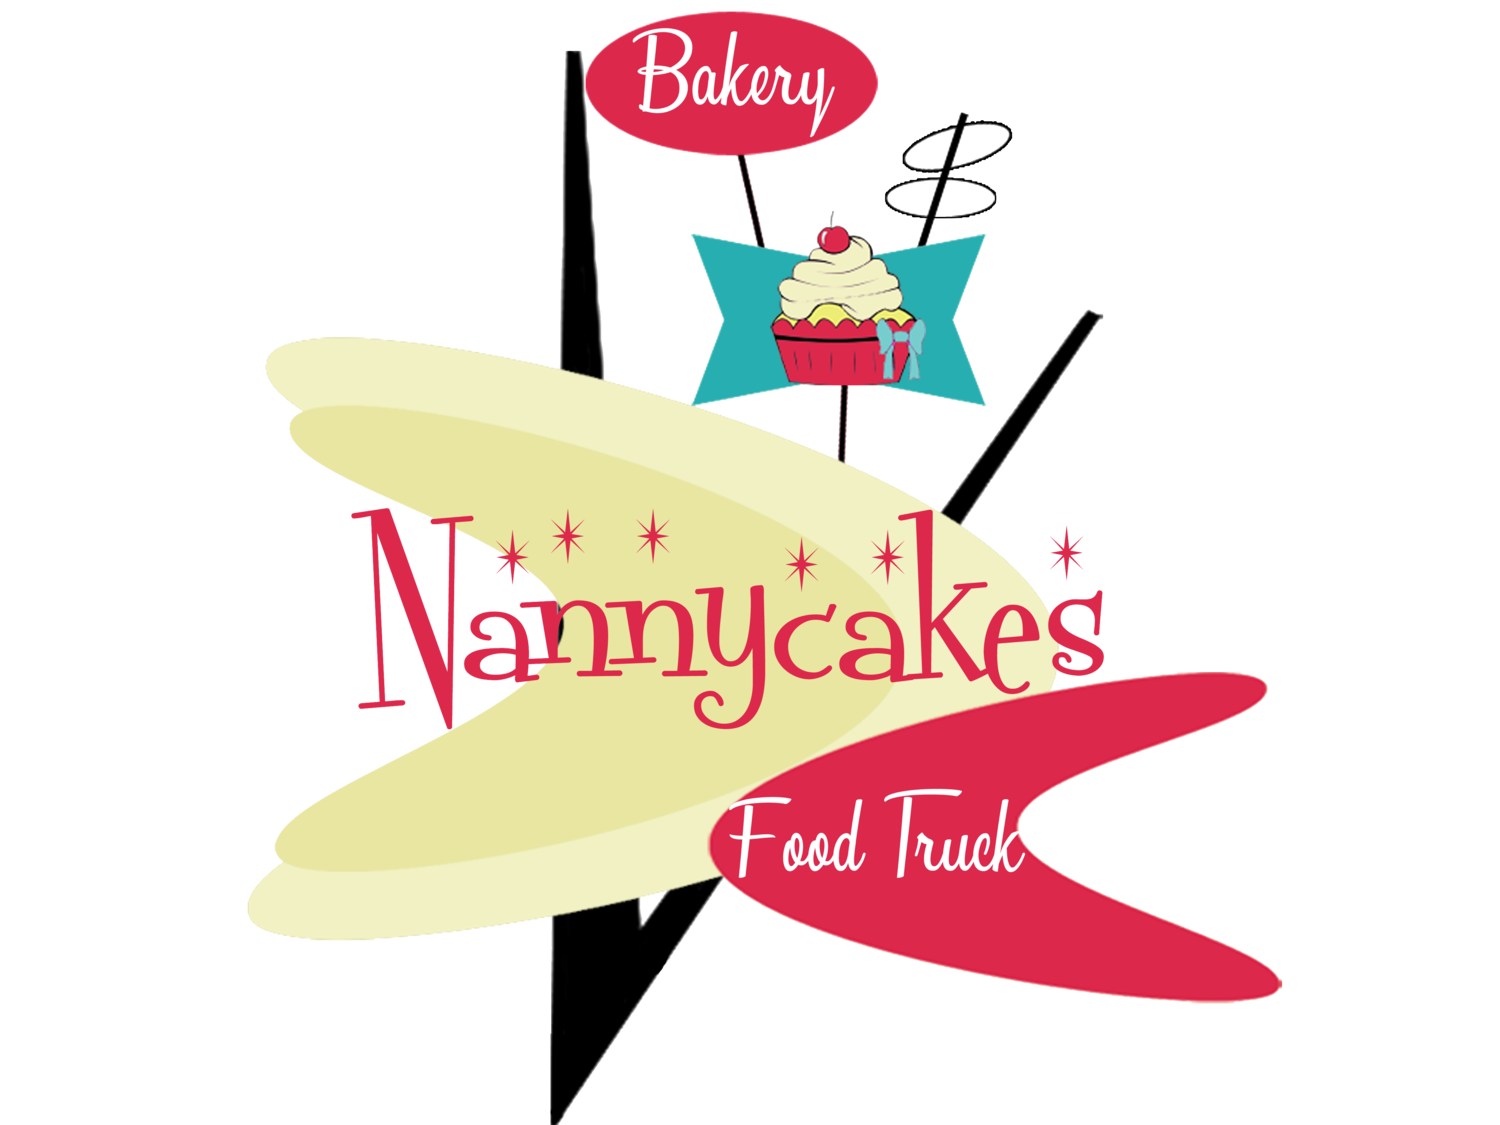 Nannycakes Bakery and Food Truck